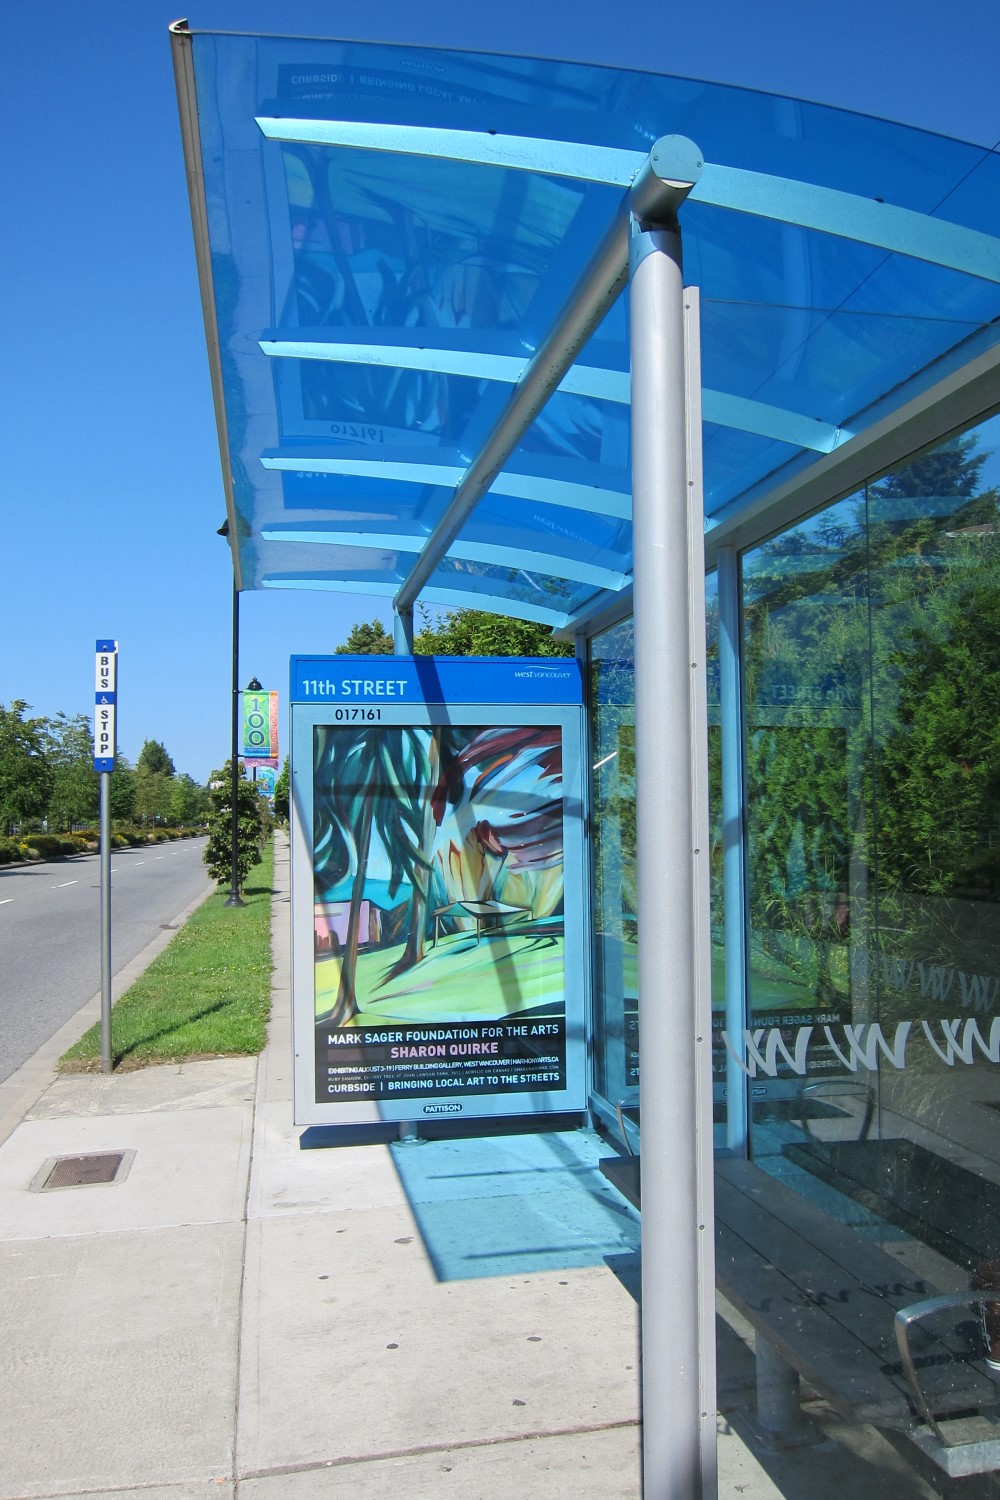 Harmony Arts Bus Shelter Project, West Vancouver, BC